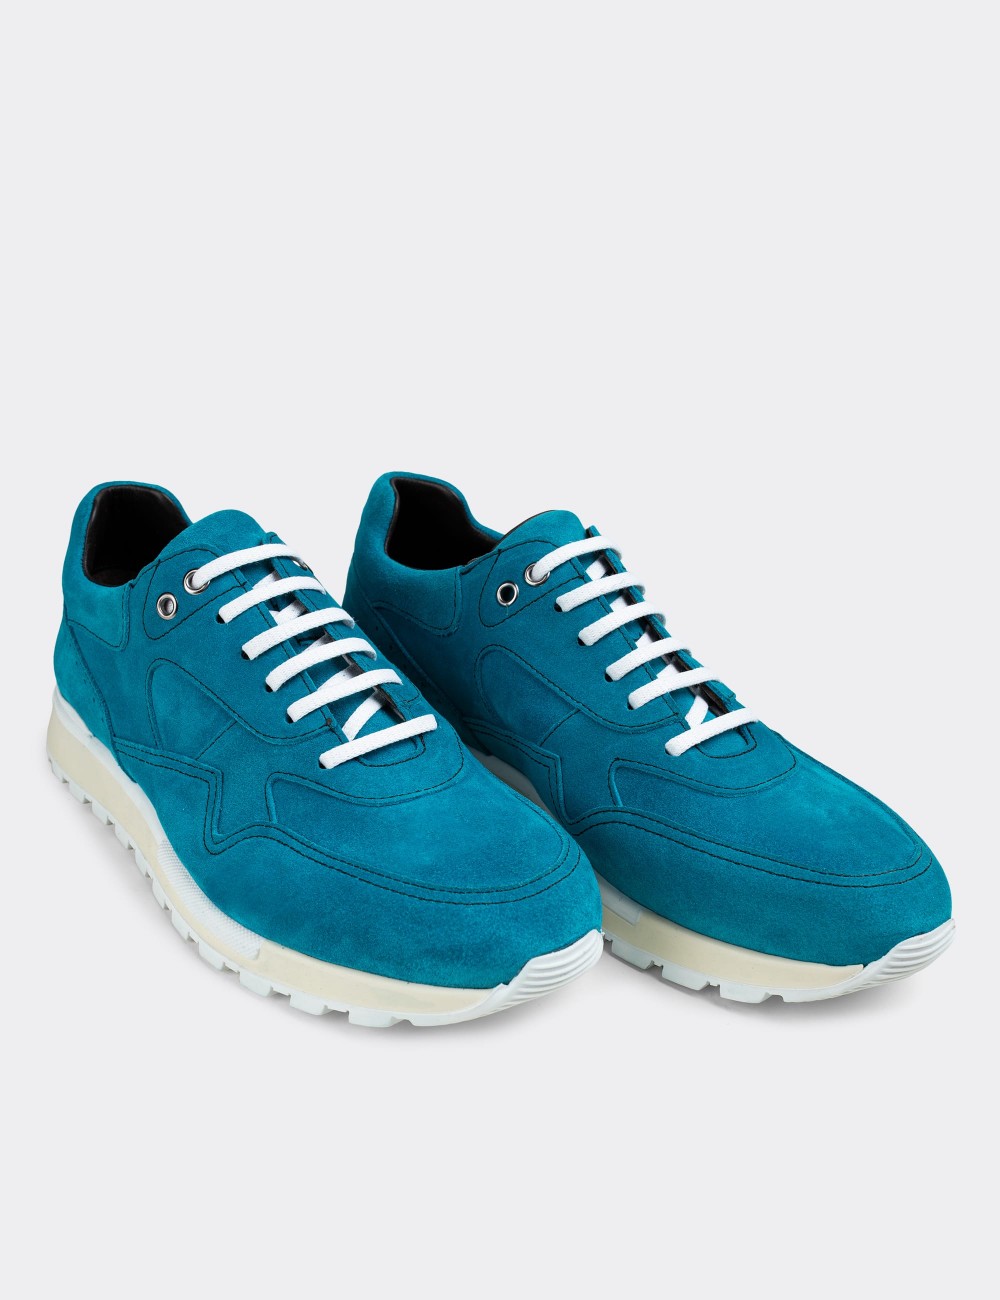 Turquoise Suede Leather Sneakers - 01818MTRKT01